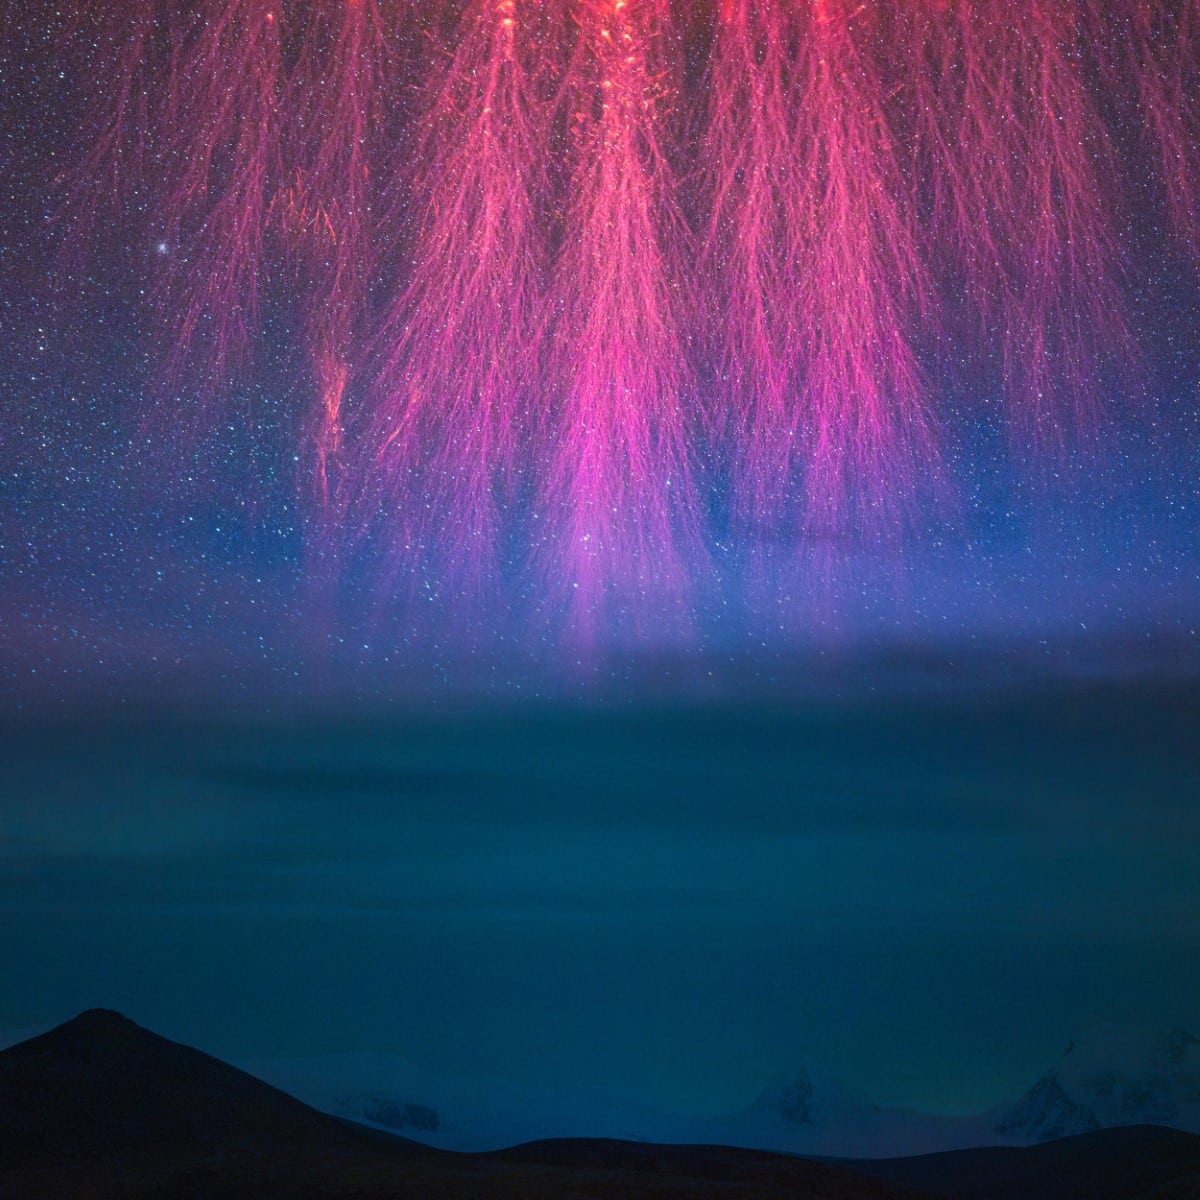 Red sprites over the Himalaya mountains